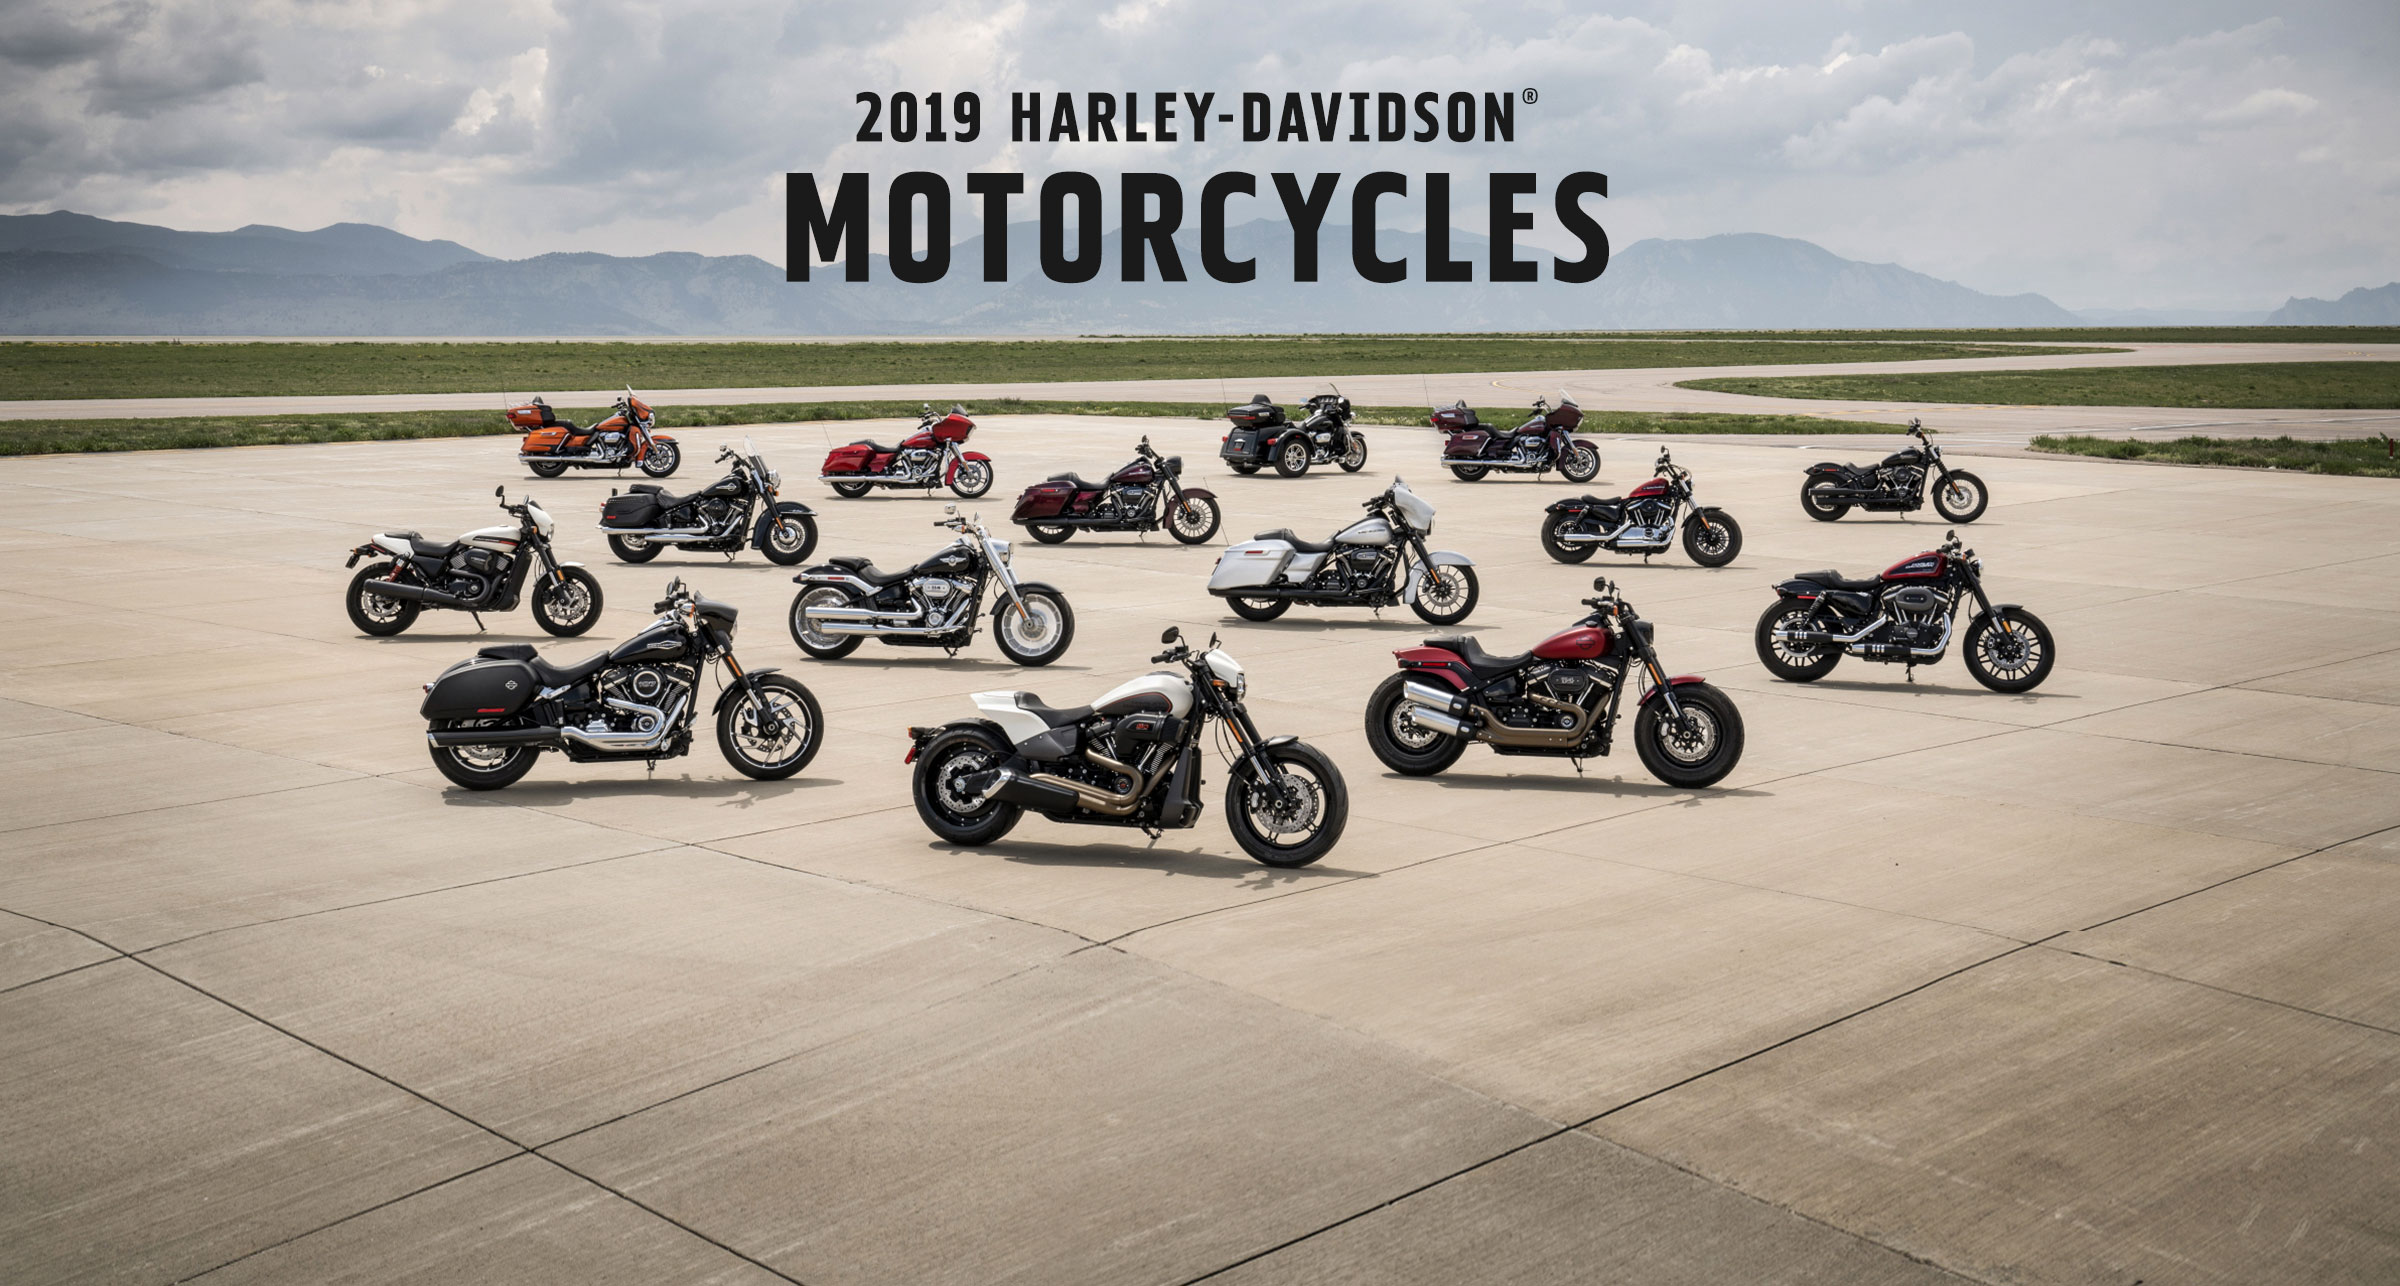 2019 Motorcycles